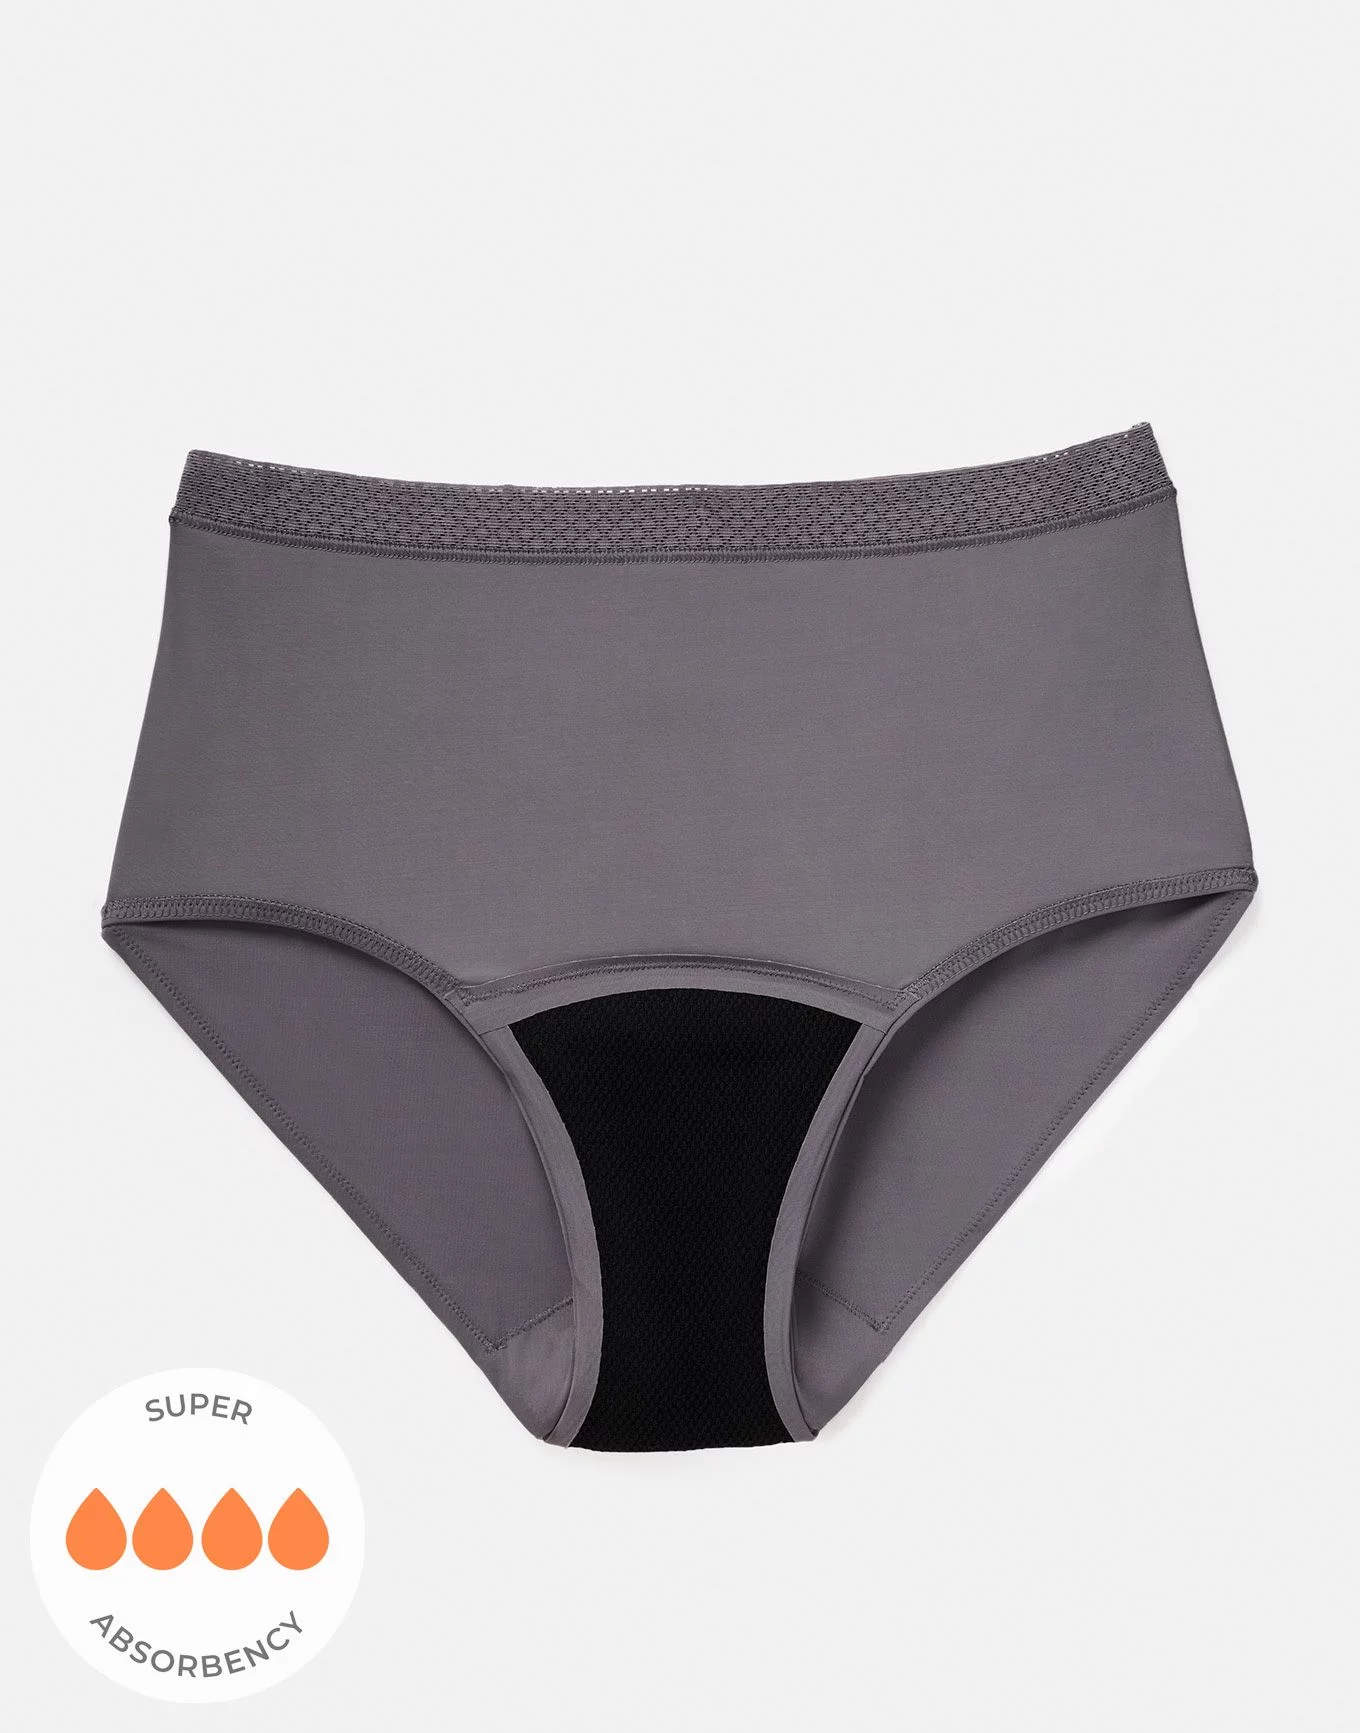 Thinx For All period proof hiphugger brief with super absorbency in black -  BLACK